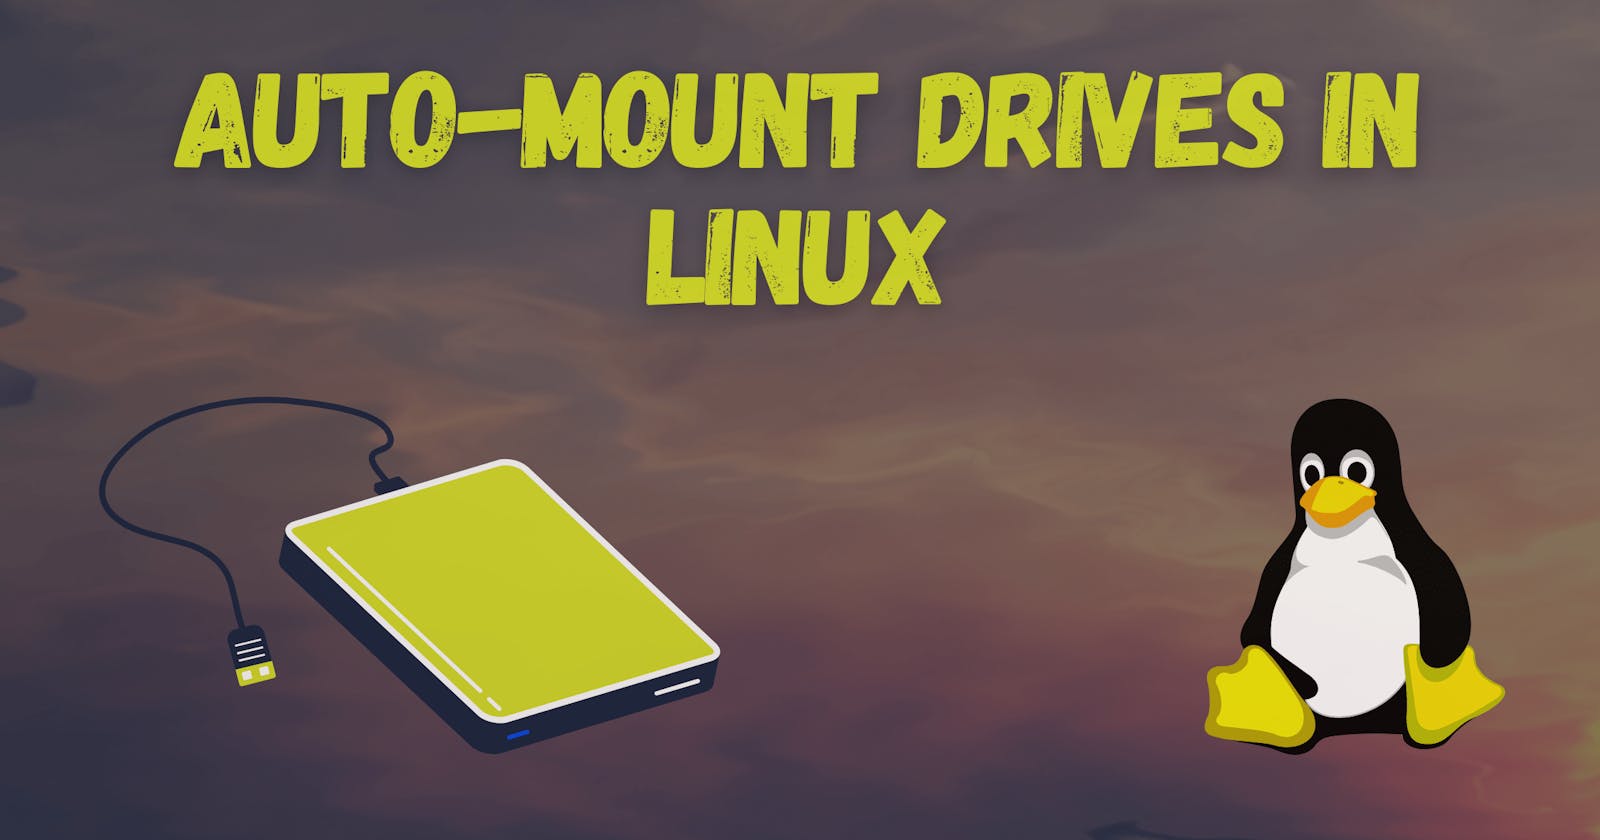 How to Auto-Mount Drives in Linux